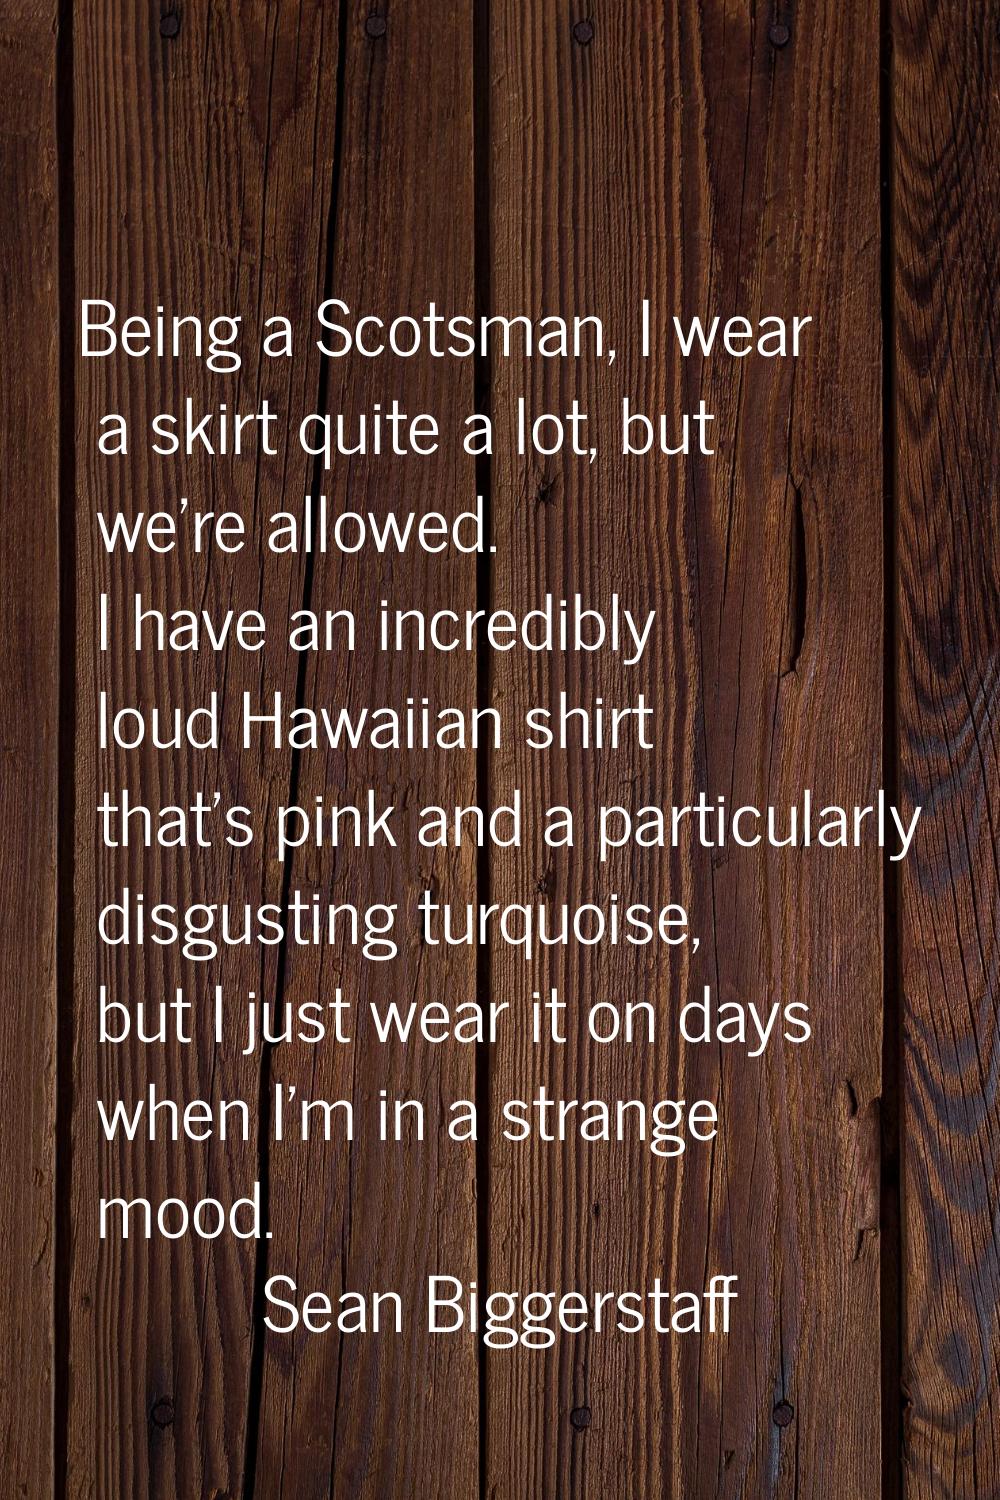 Being a Scotsman, I wear a skirt quite a lot, but we're allowed. I have an incredibly loud Hawaiian